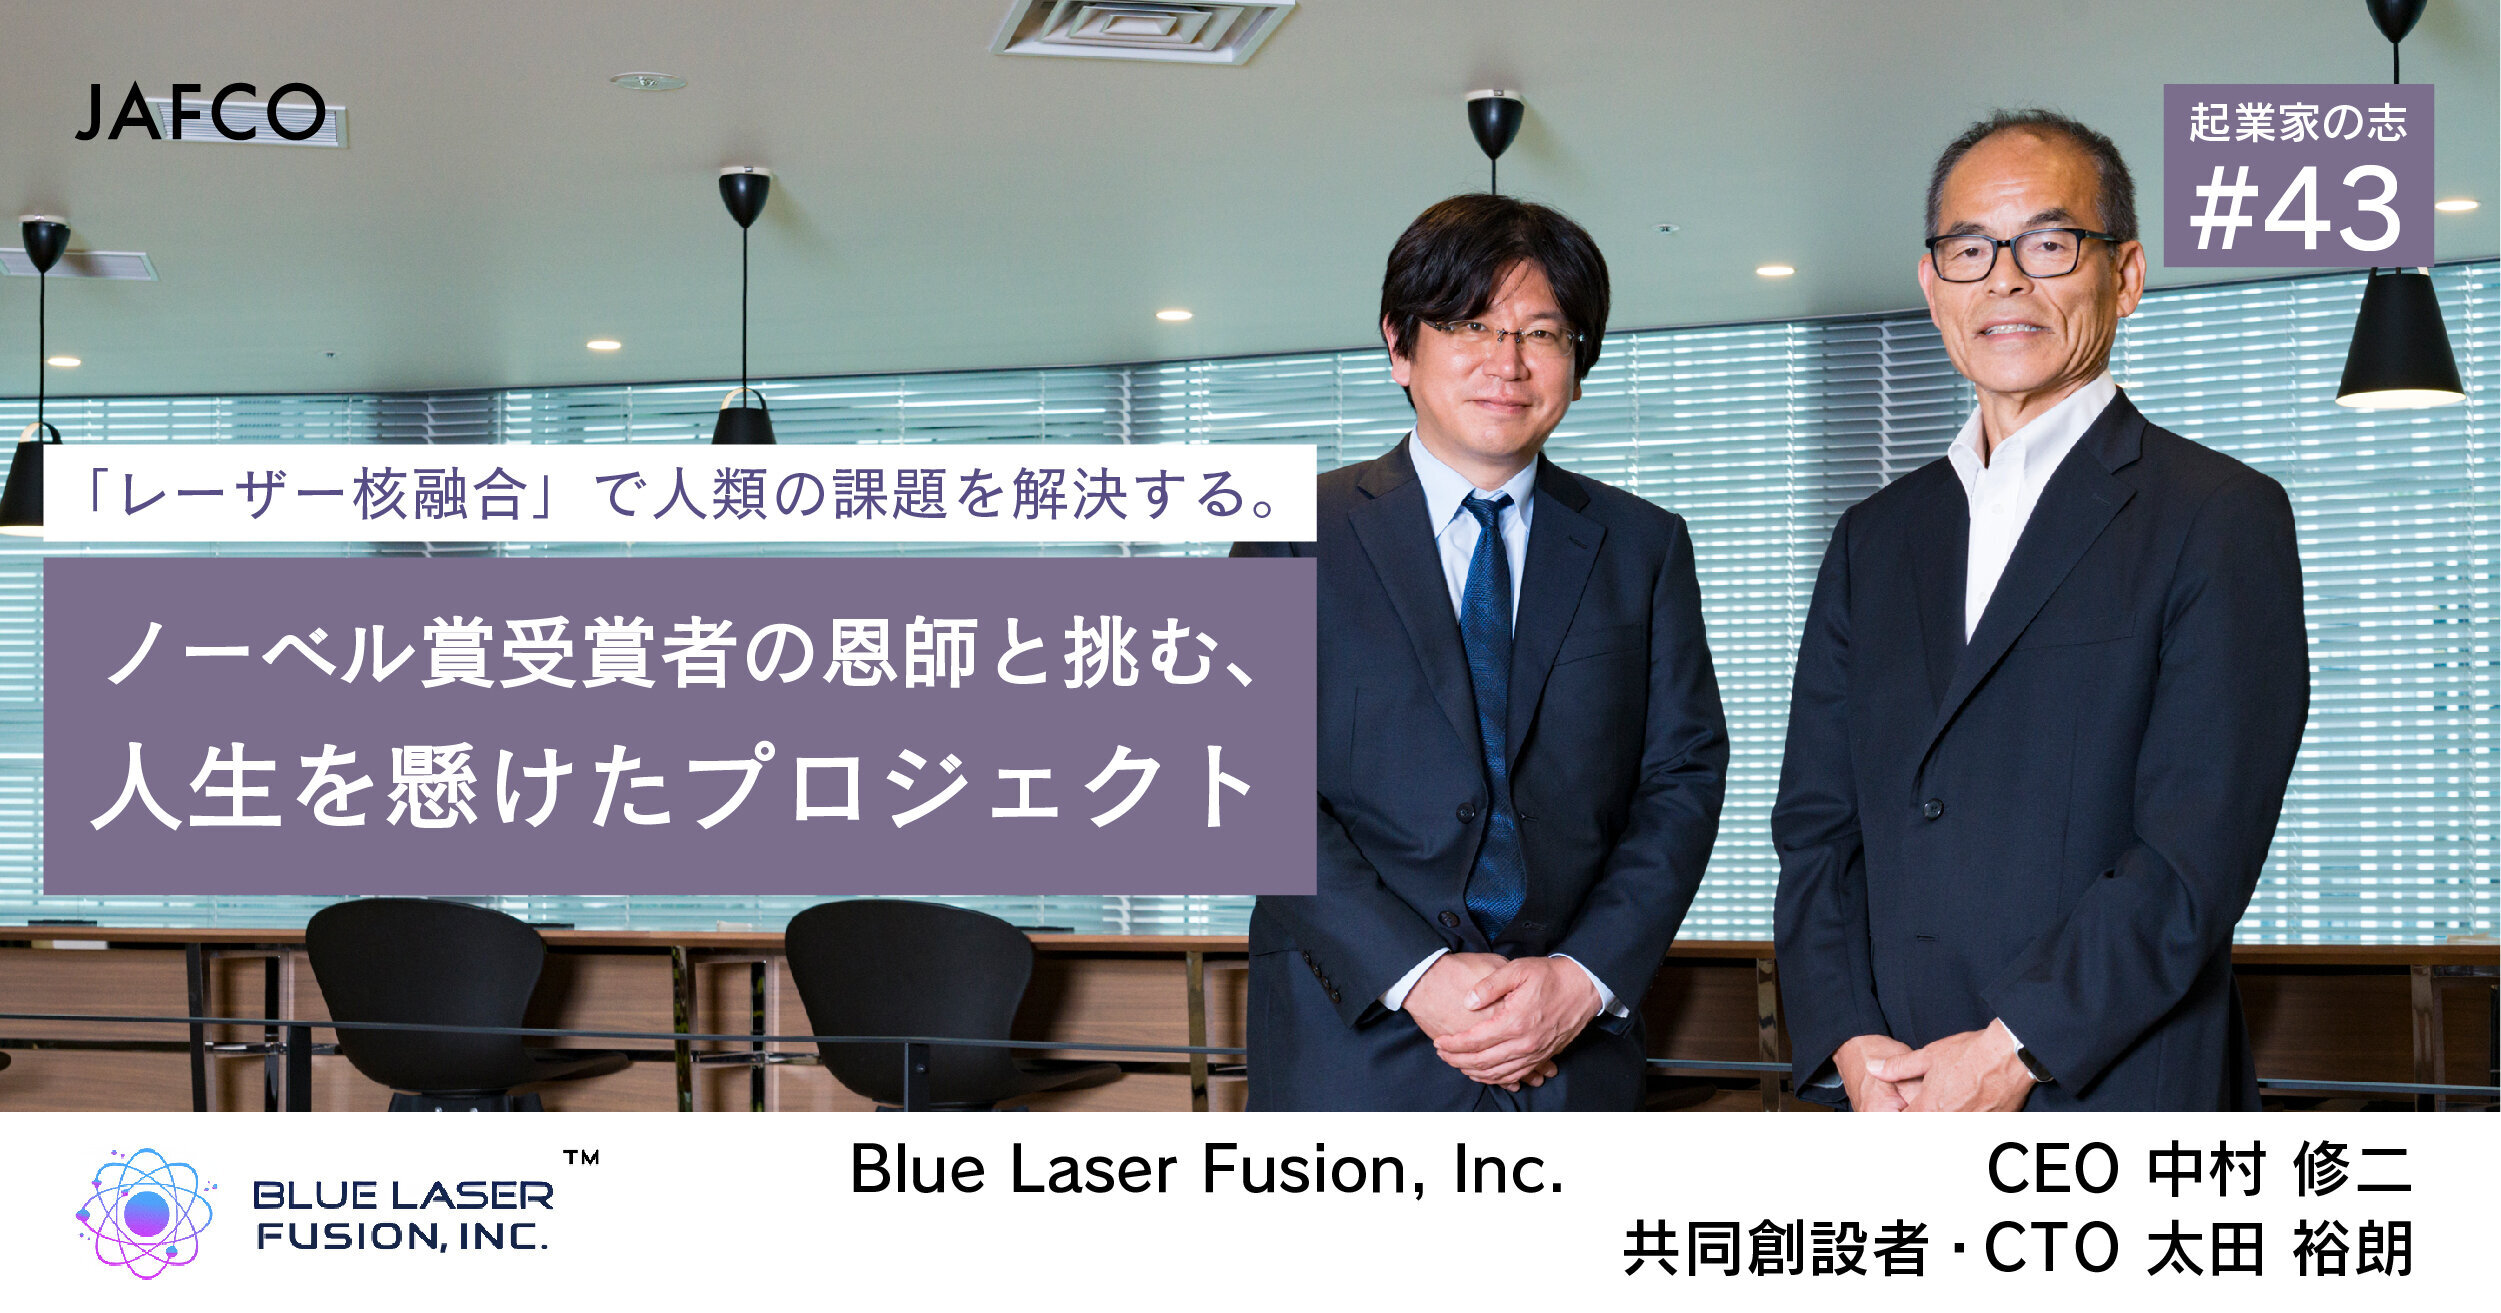 Laser Fusion: Tackling Humanity's Problems Together with a Nobel Prize-Winning Mentor